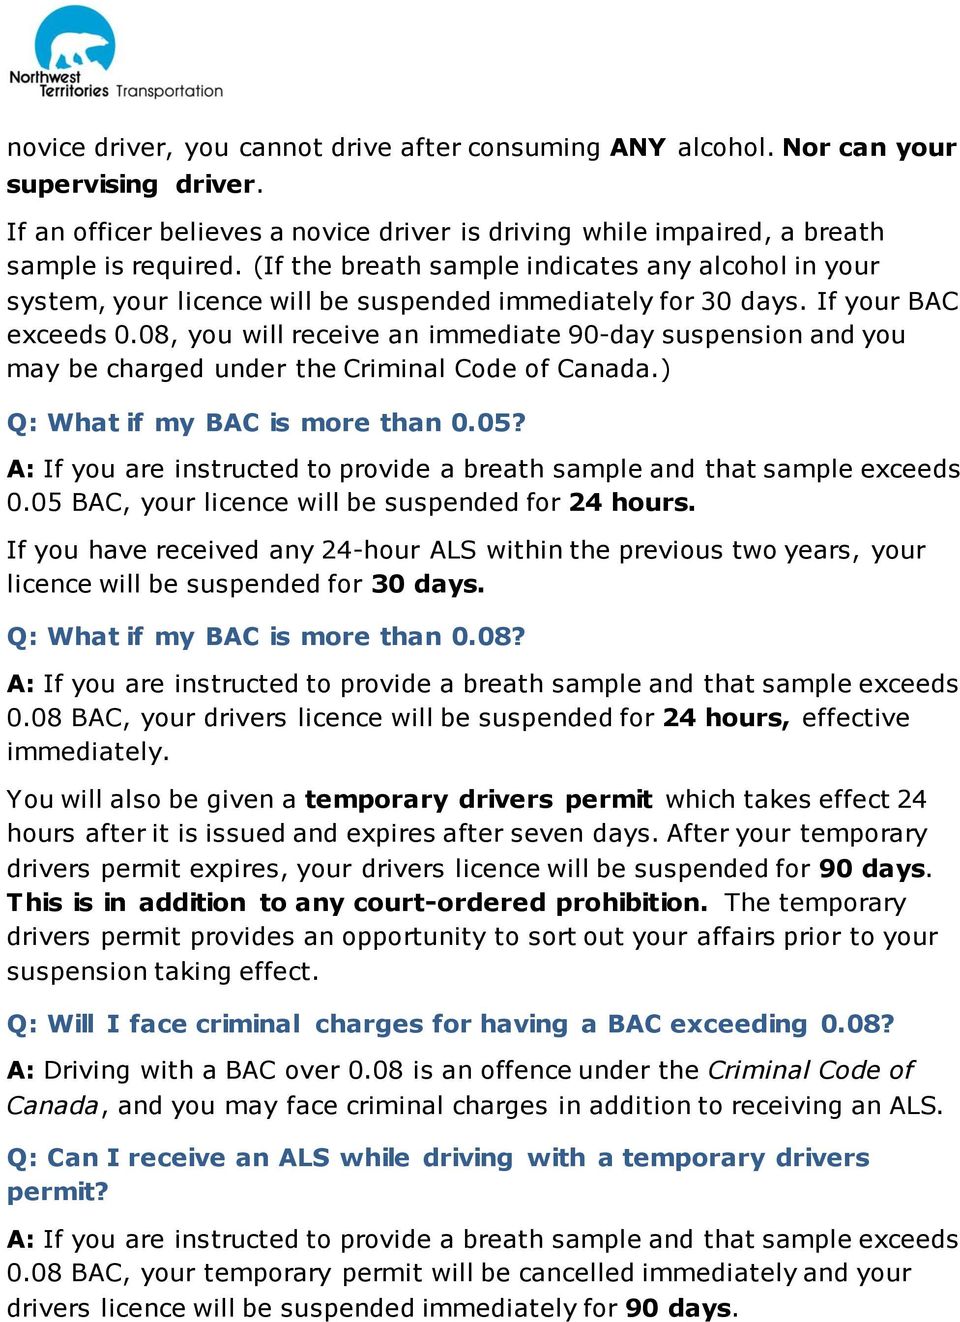 08, you will receive an immediate 90-day suspension and you may be charged under the Criminal Code of Canada.) Q: What if my BAC is more than 0.05?